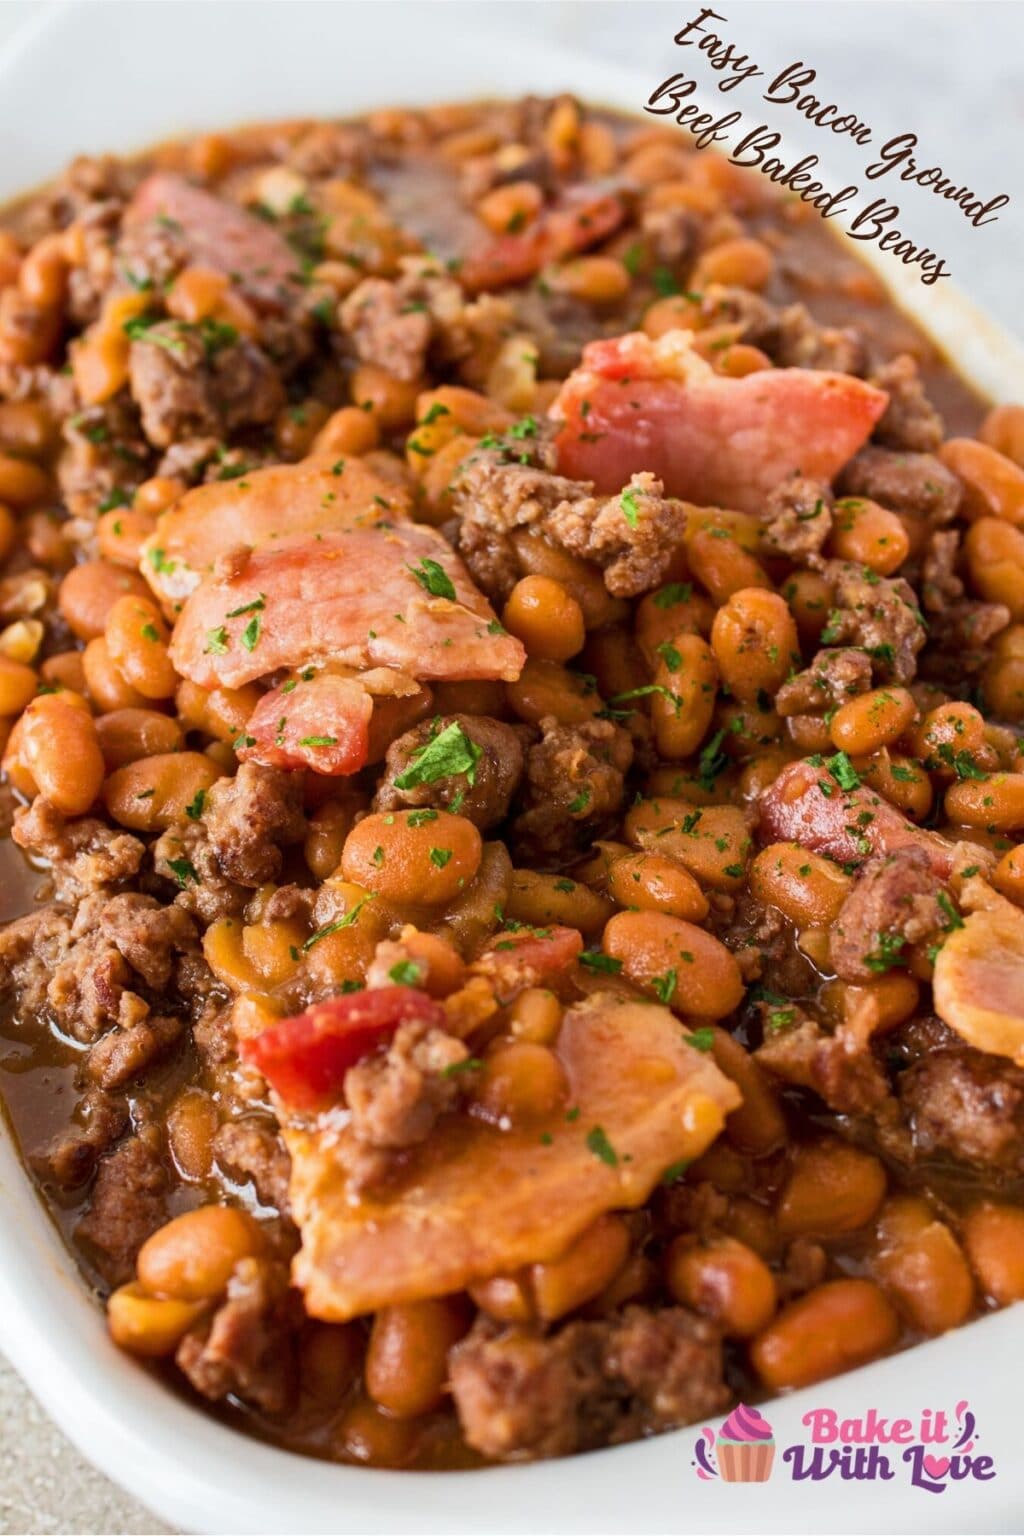 Best EverBaked Beans with Ground Beef and Bacon (Baked &amp; Crockpot!)